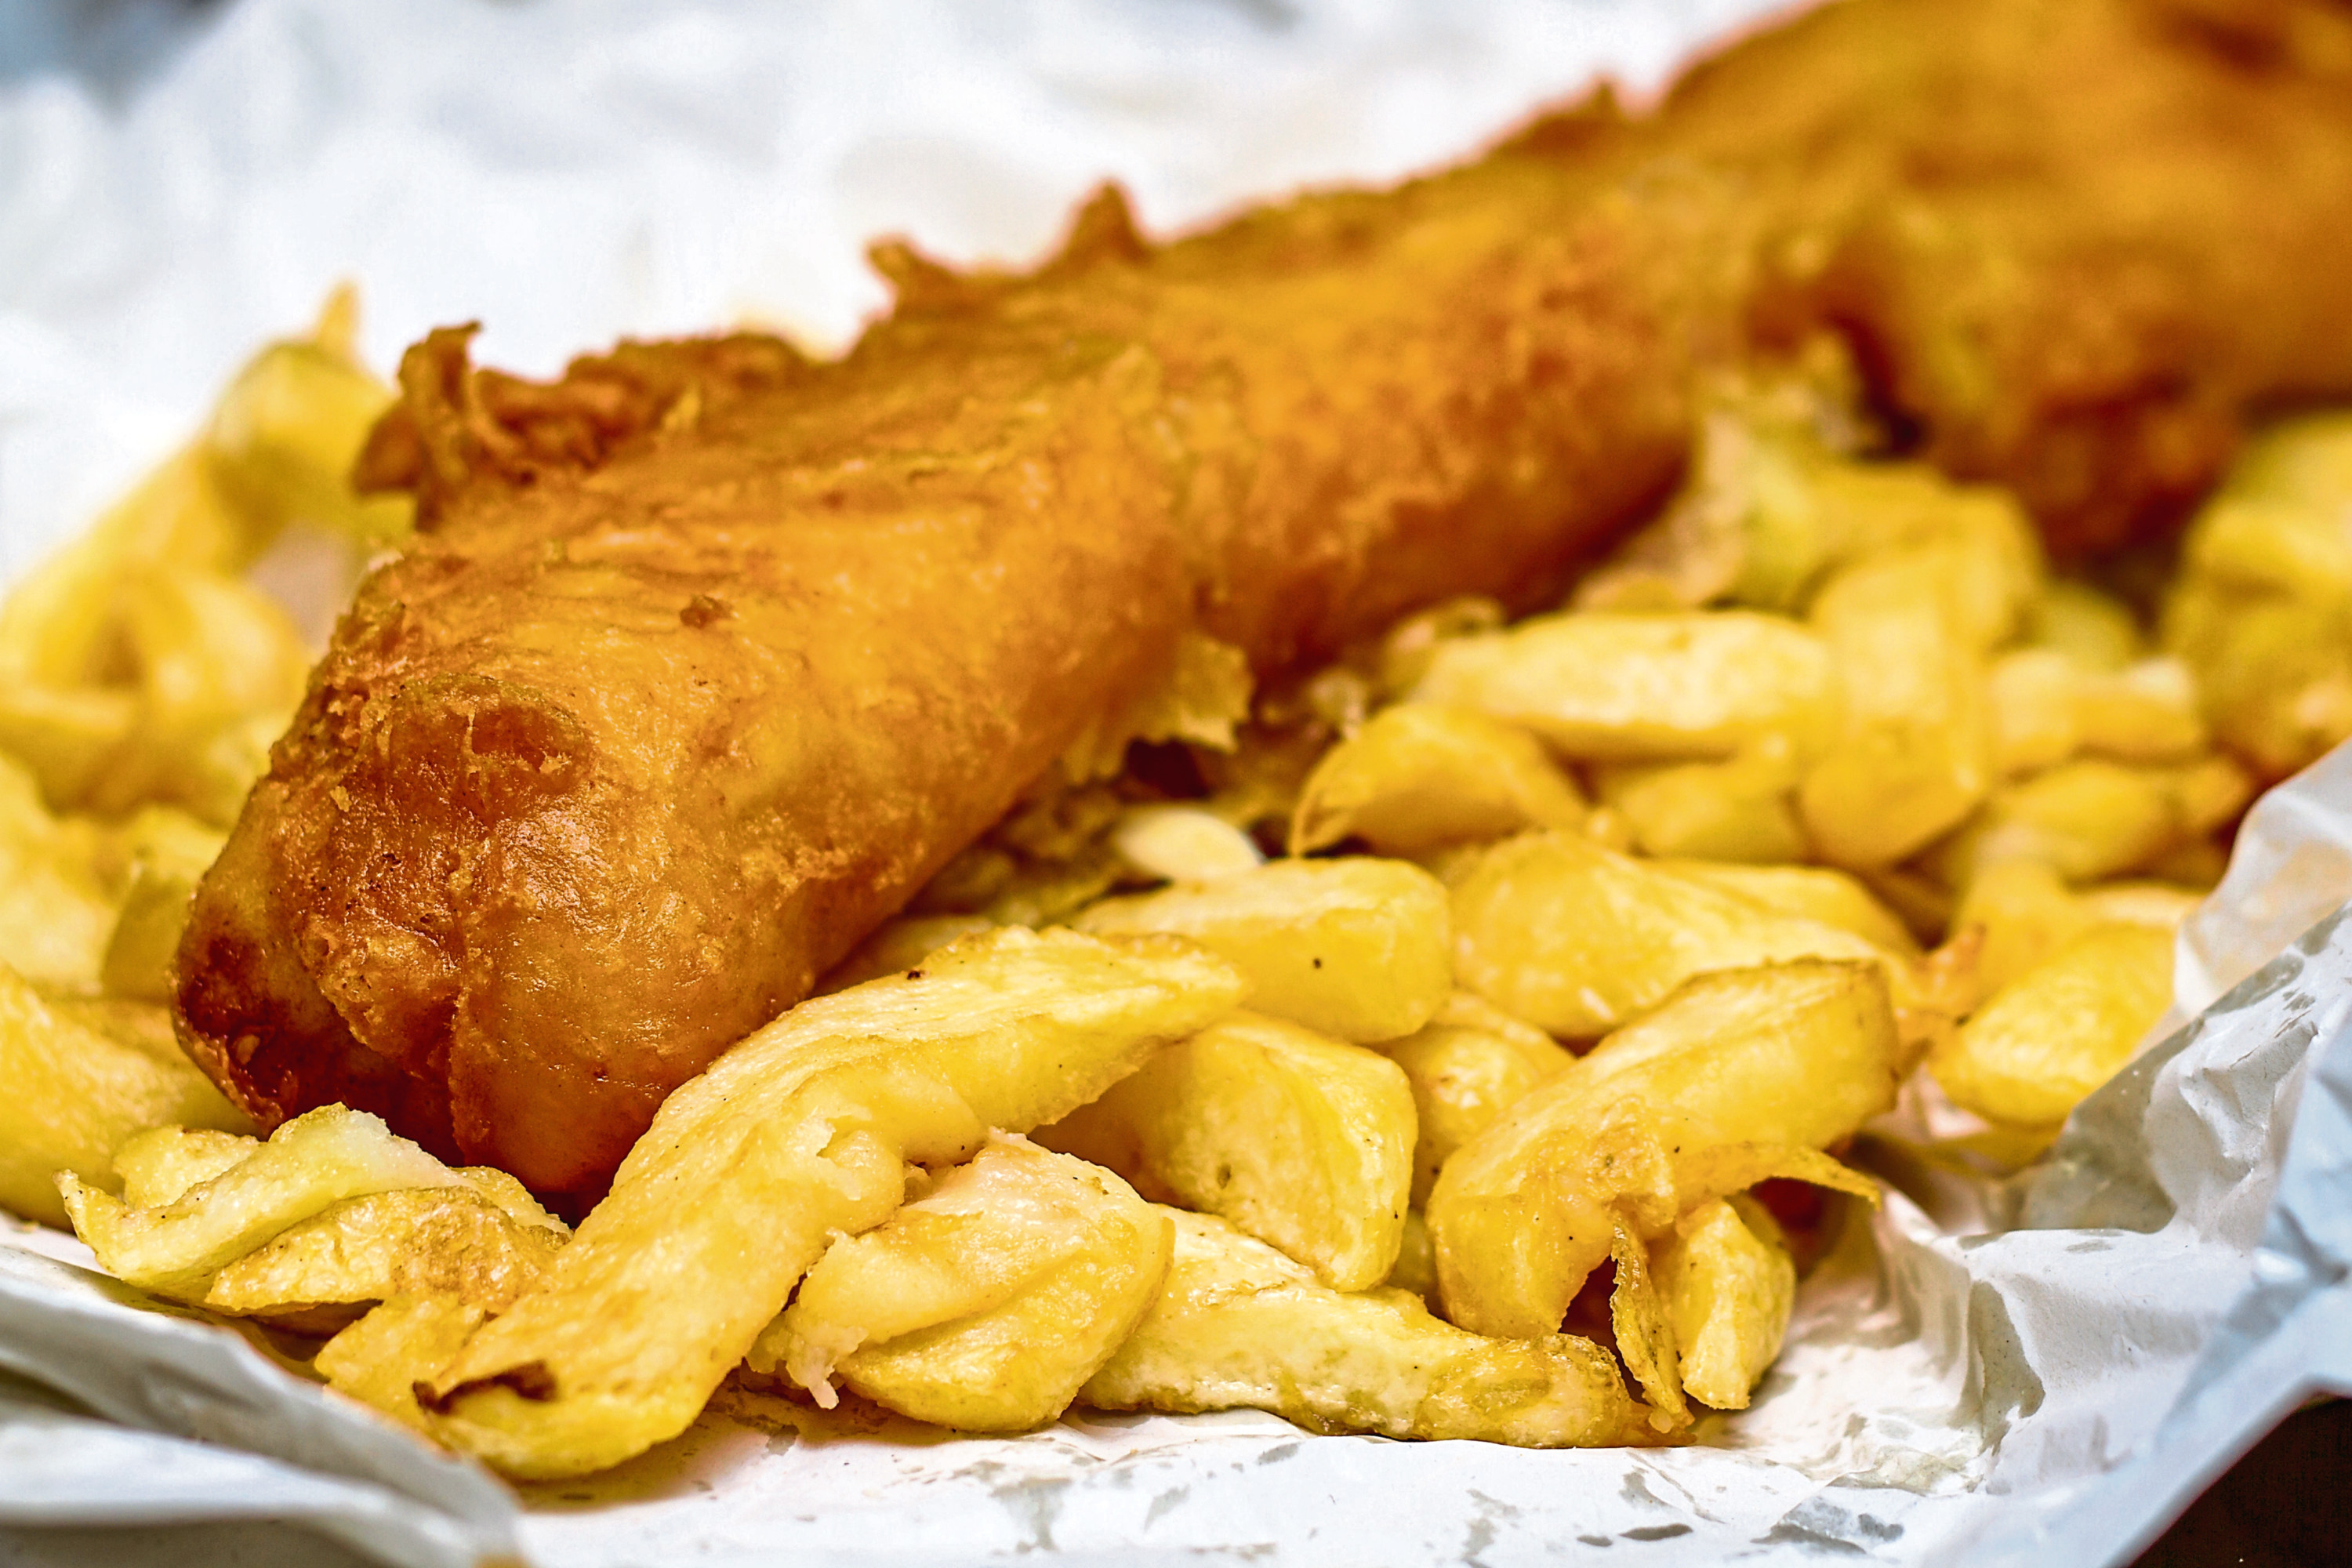 Takeaway customers are embracing smaller portions of fish ...